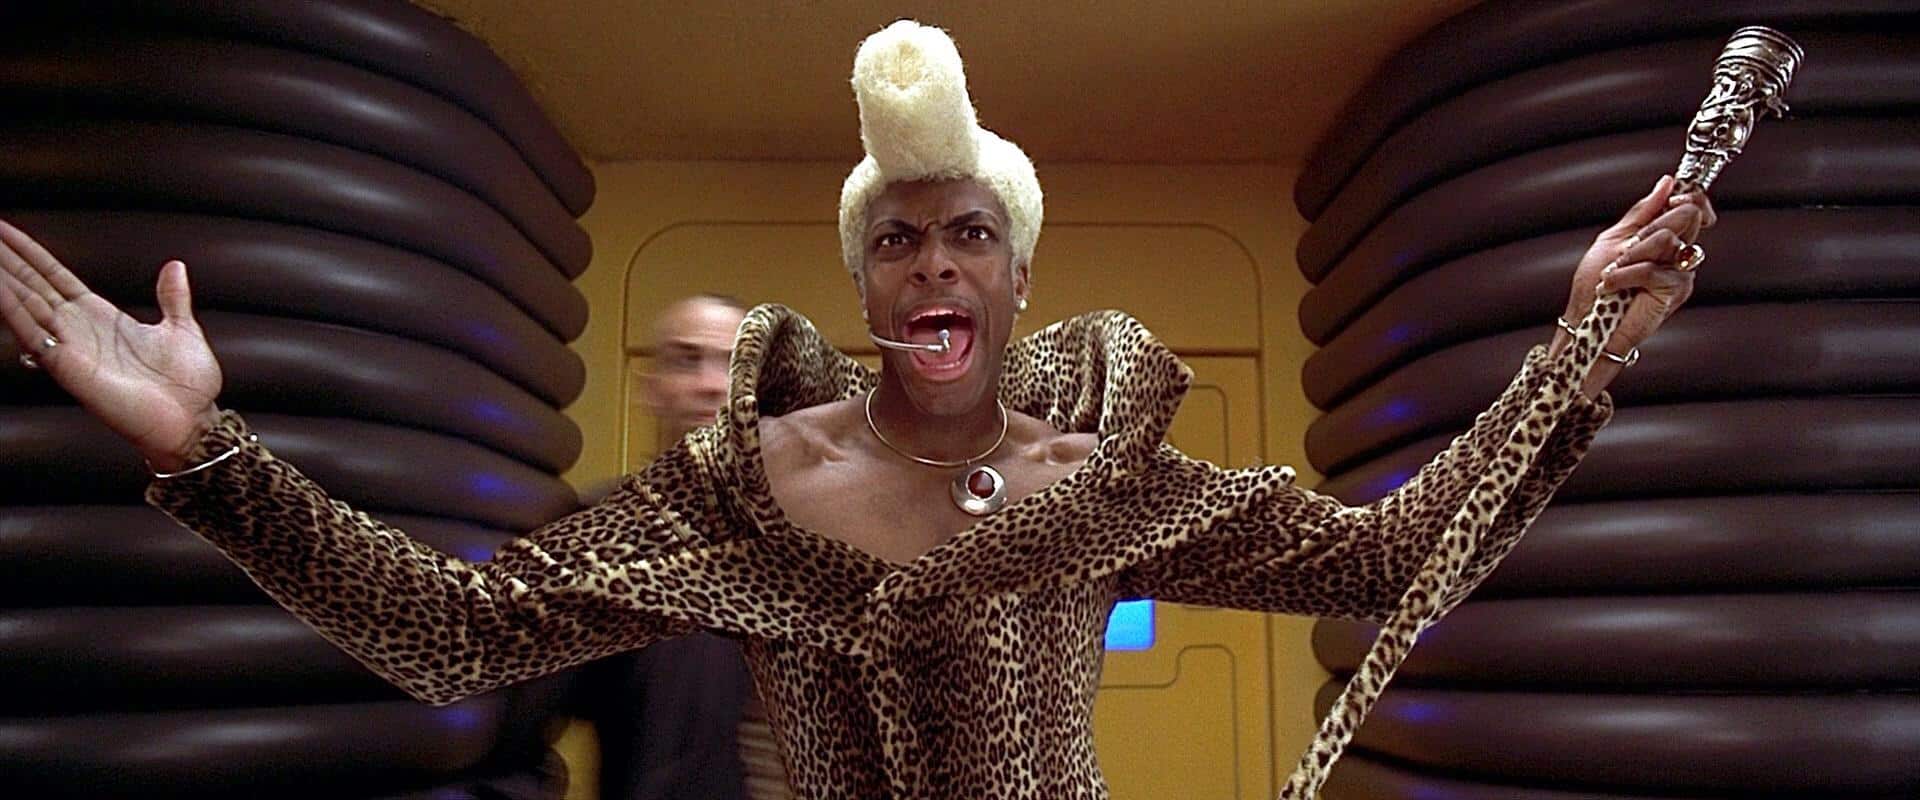 The Fifth Element (1997) | Chris Tucker in The Fifth Element (1997)